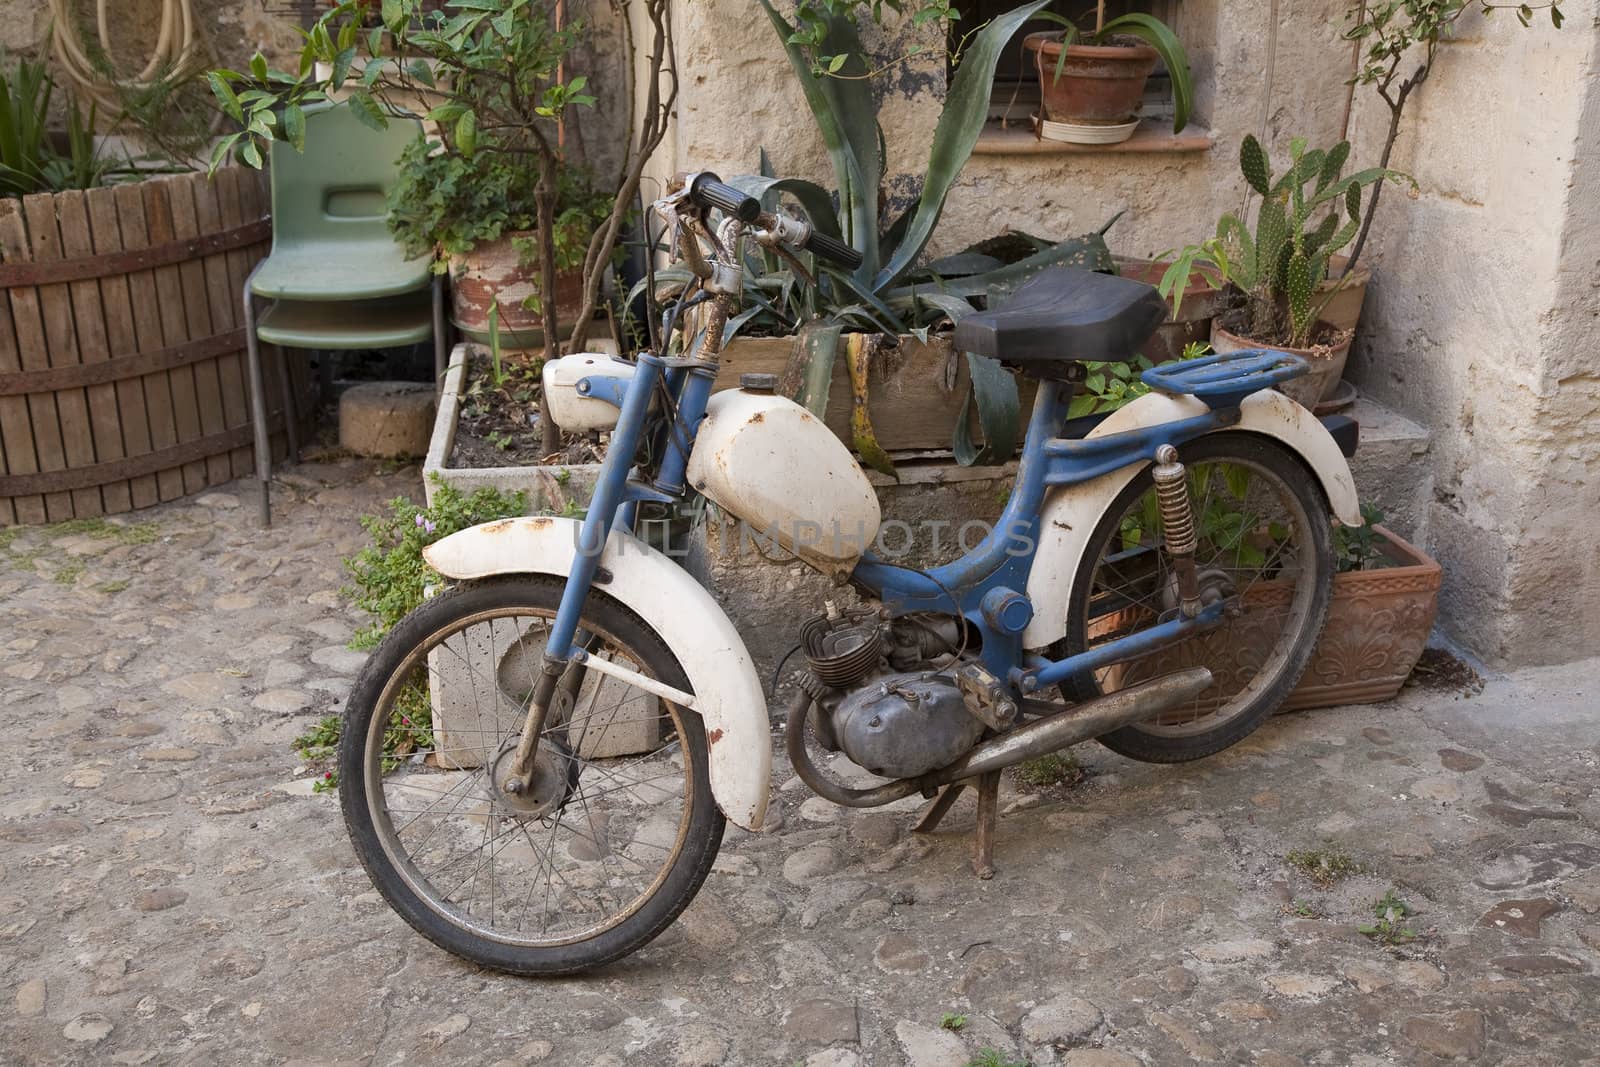 Vintage Italian moped by ABCDK